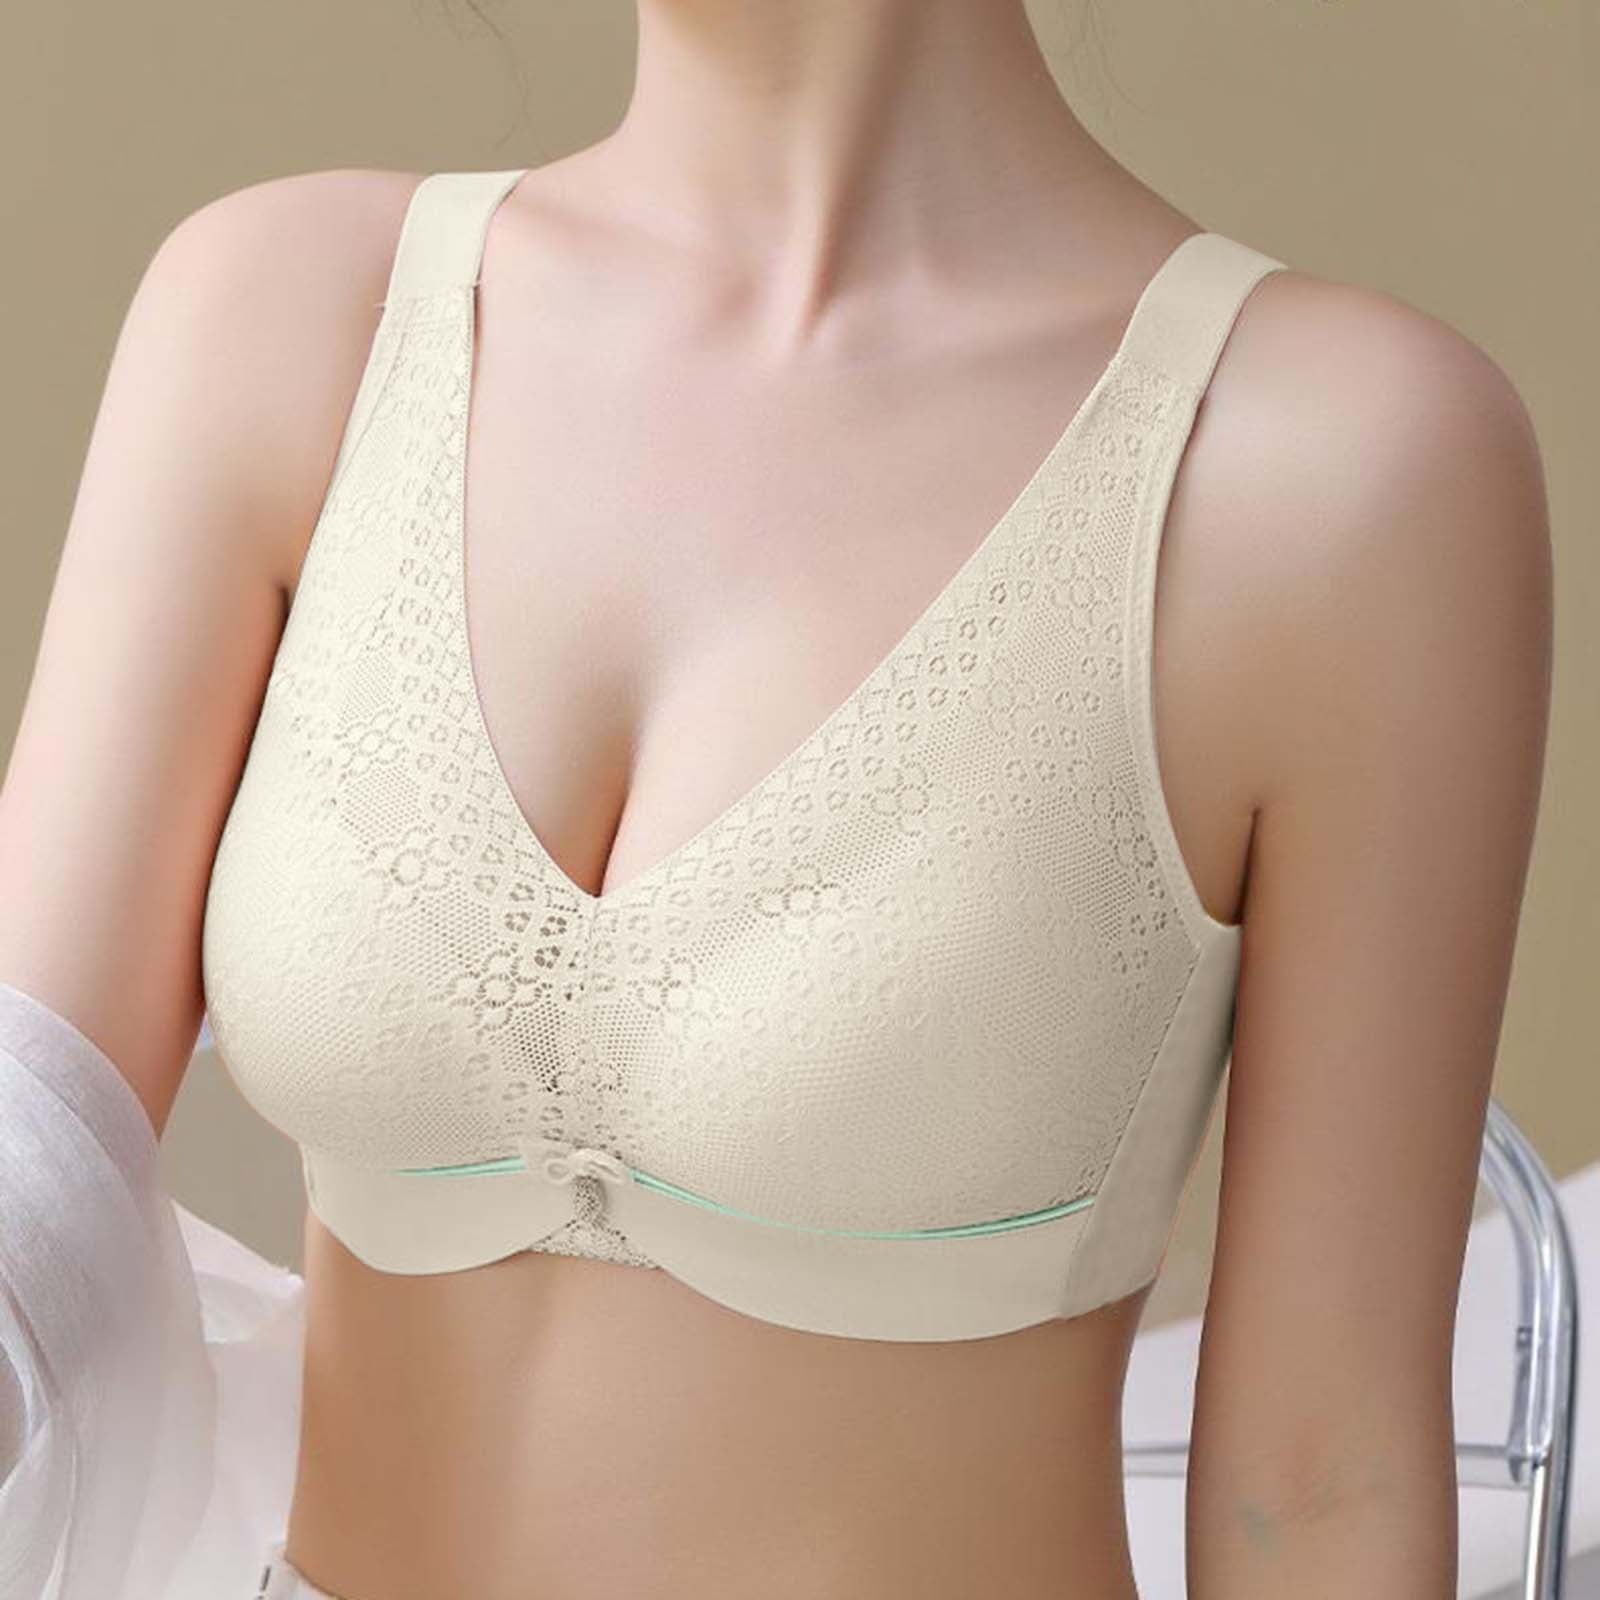 CAICJ98 Women'S Lingerie Support Wireless Bra, Lace Bra with Stay-in-Place  Straps, Full-Coverage Wirefree Bra, Tagless for Everyday Wear White,M 